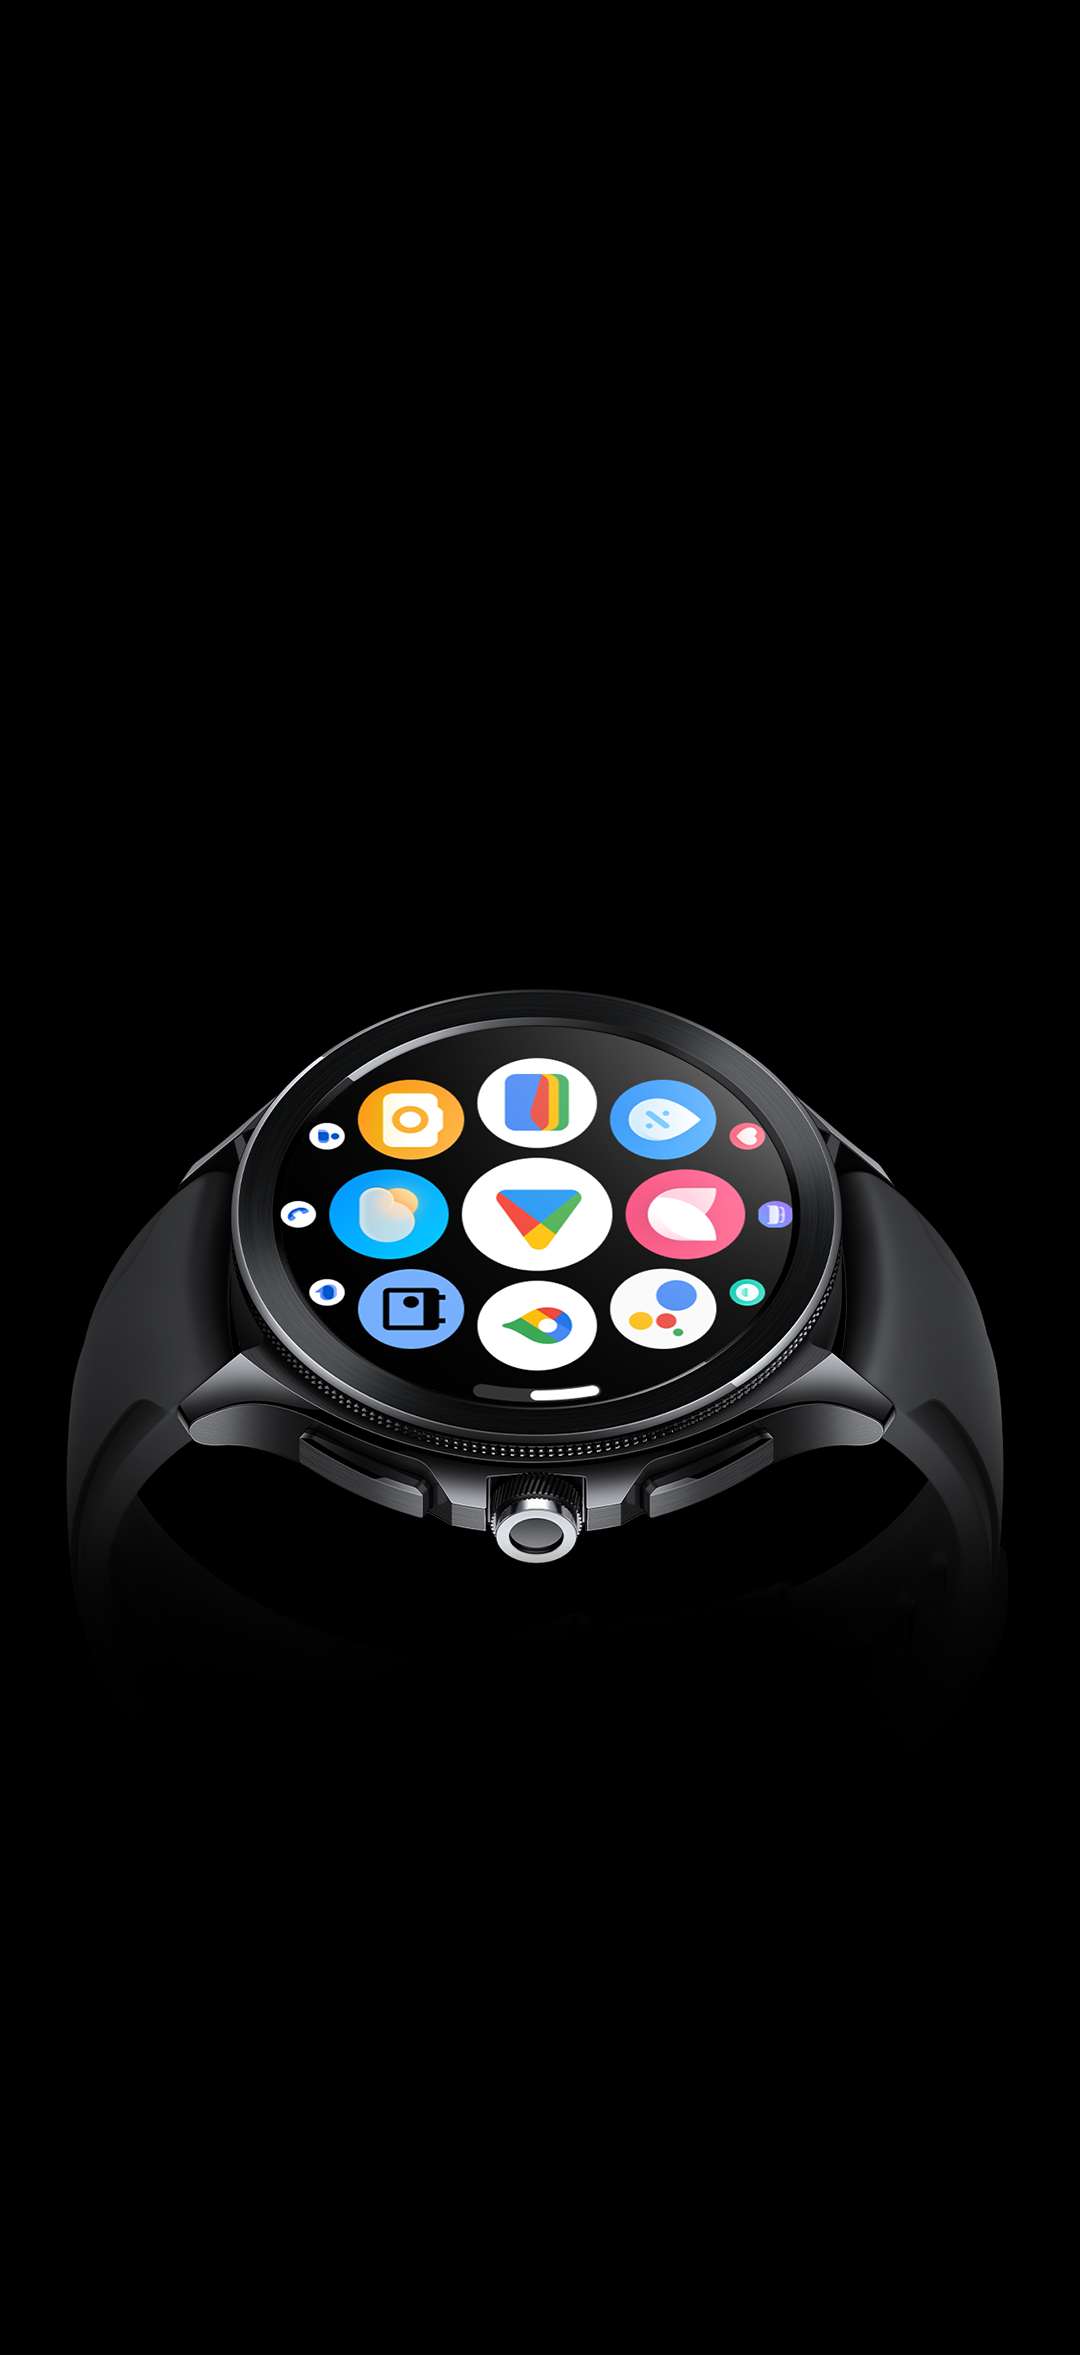 Xiaomi Watch 2 Pro Unveiled Globally: A Feature-Packed Wear OS Smartwatch  with 4G LTE Support